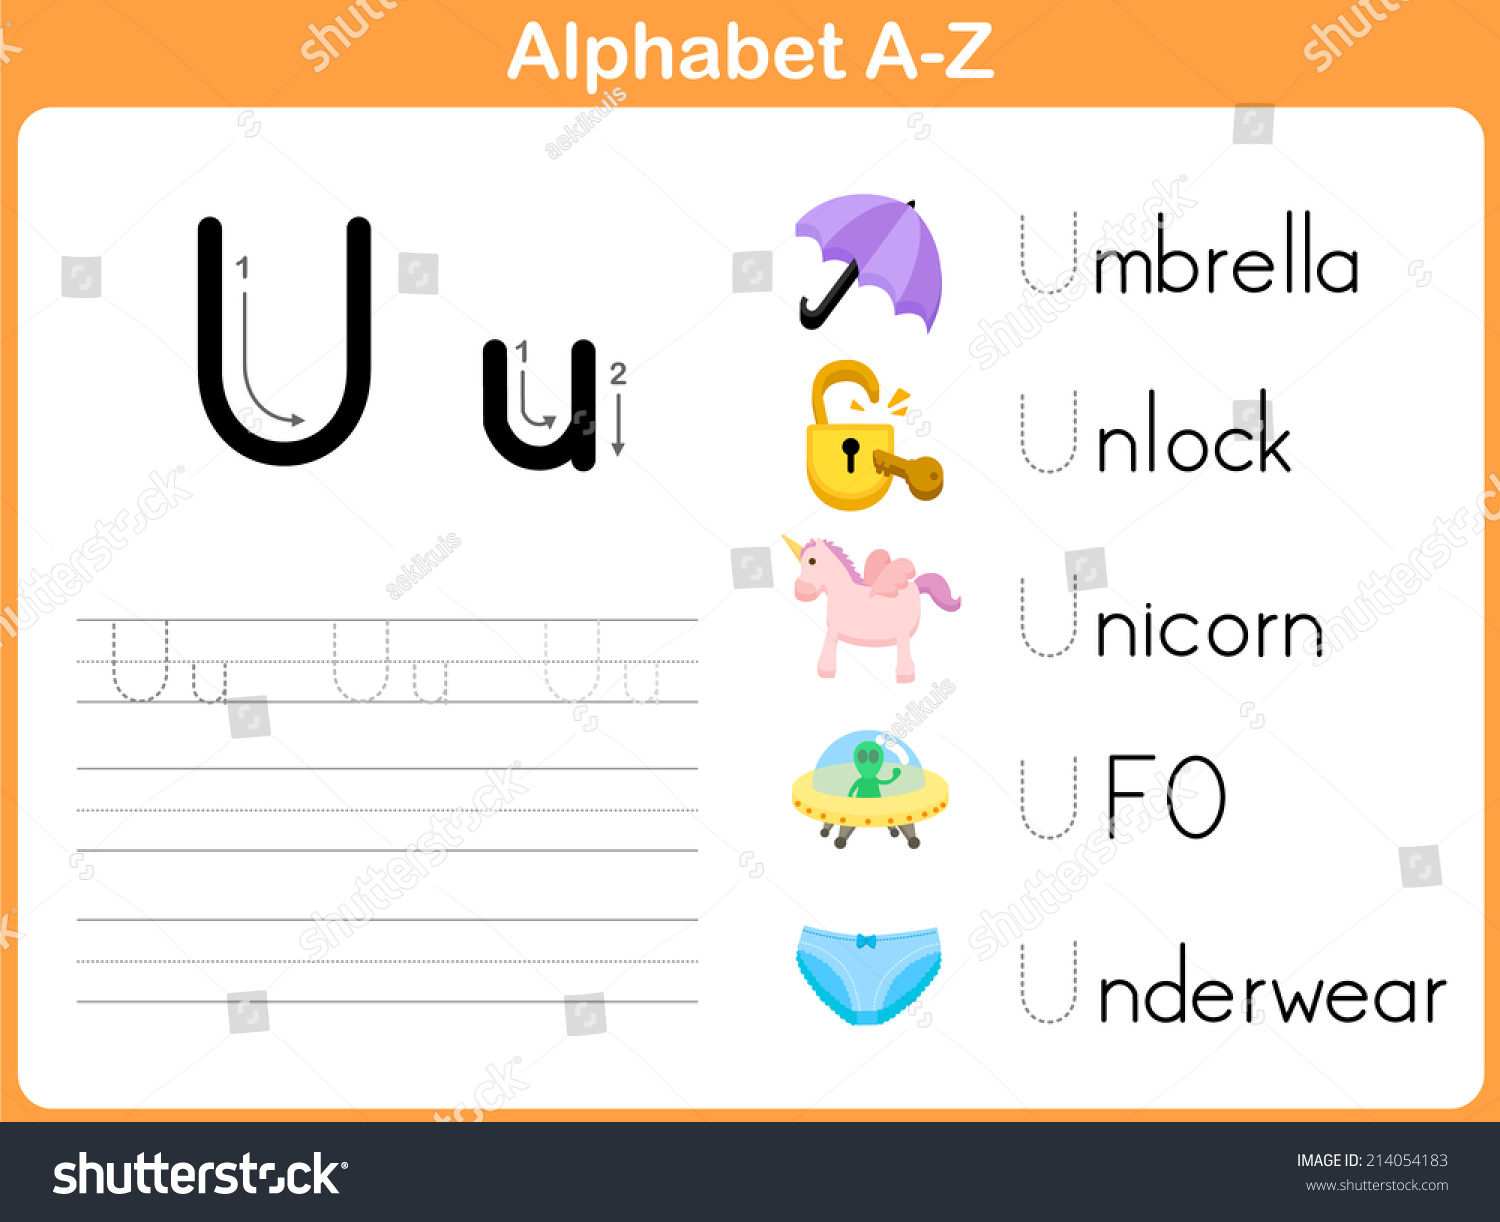 Printable Alphabet Tracing Worksheets A Z – Printable Editable  worksheets for teachers, printable worksheets, multiplication, free worksheets, and math worksheets Tracing Letters A Z Worksheet 1222 x 1500